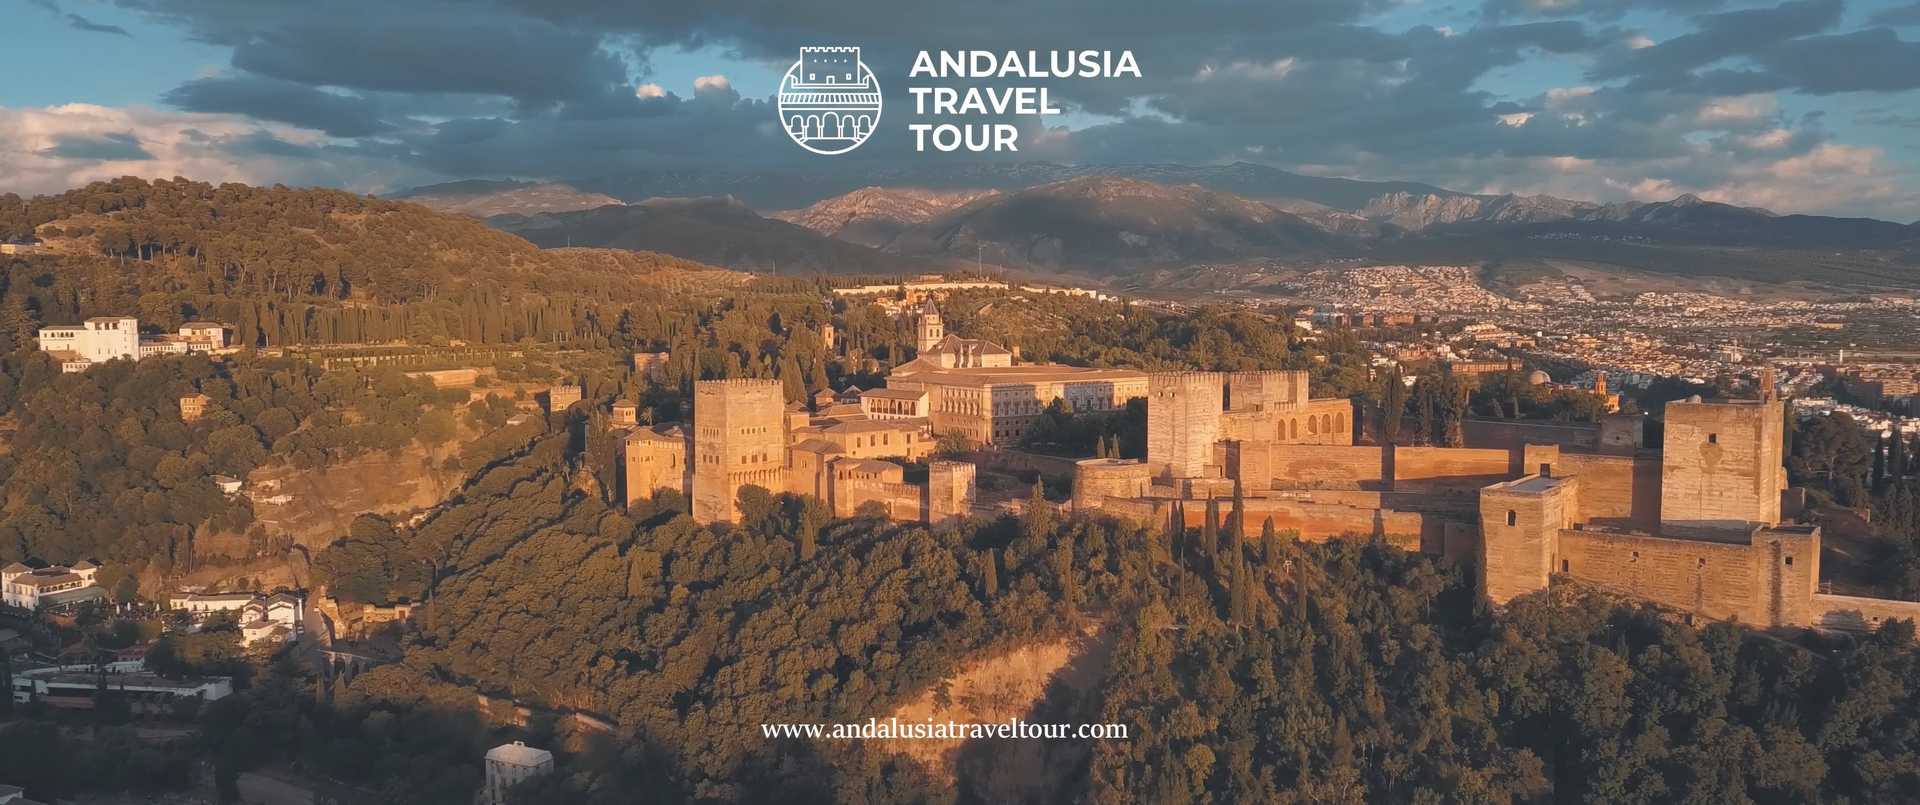 Andalusia Travel Tour